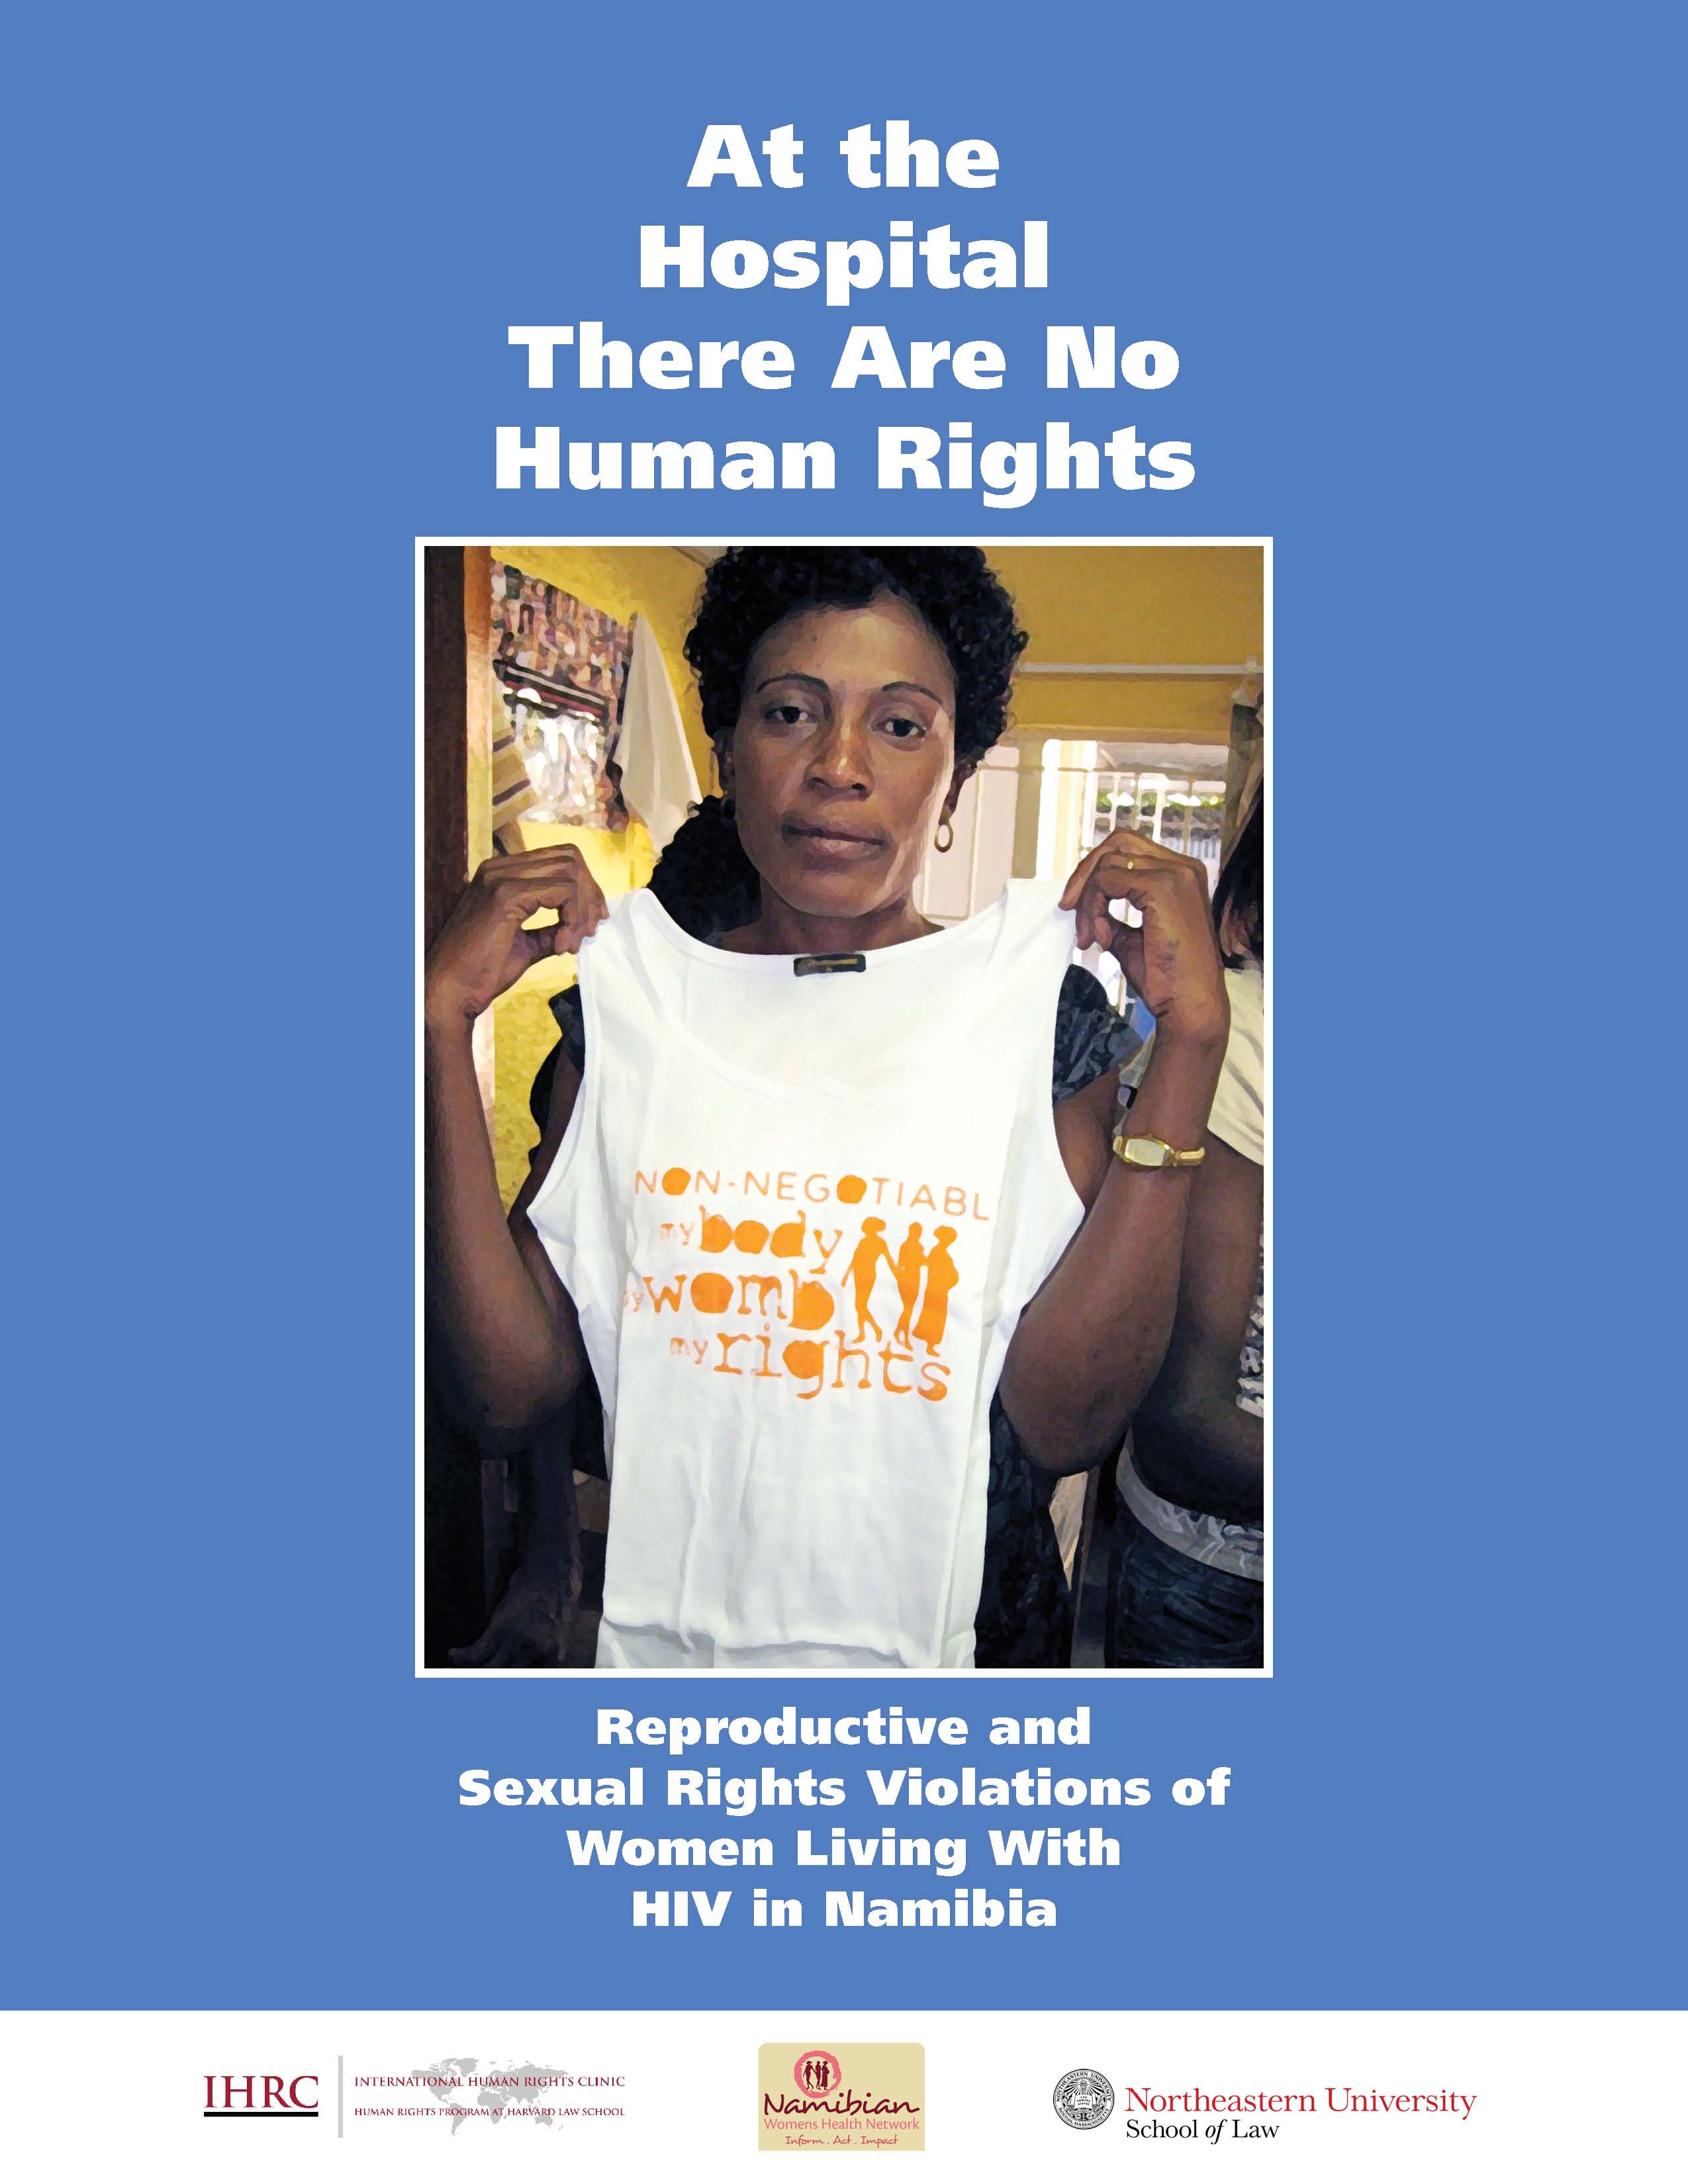 A poster for an event depicts a woman holding a tank top that says "non-negotiable: my body, my womb, my rights."